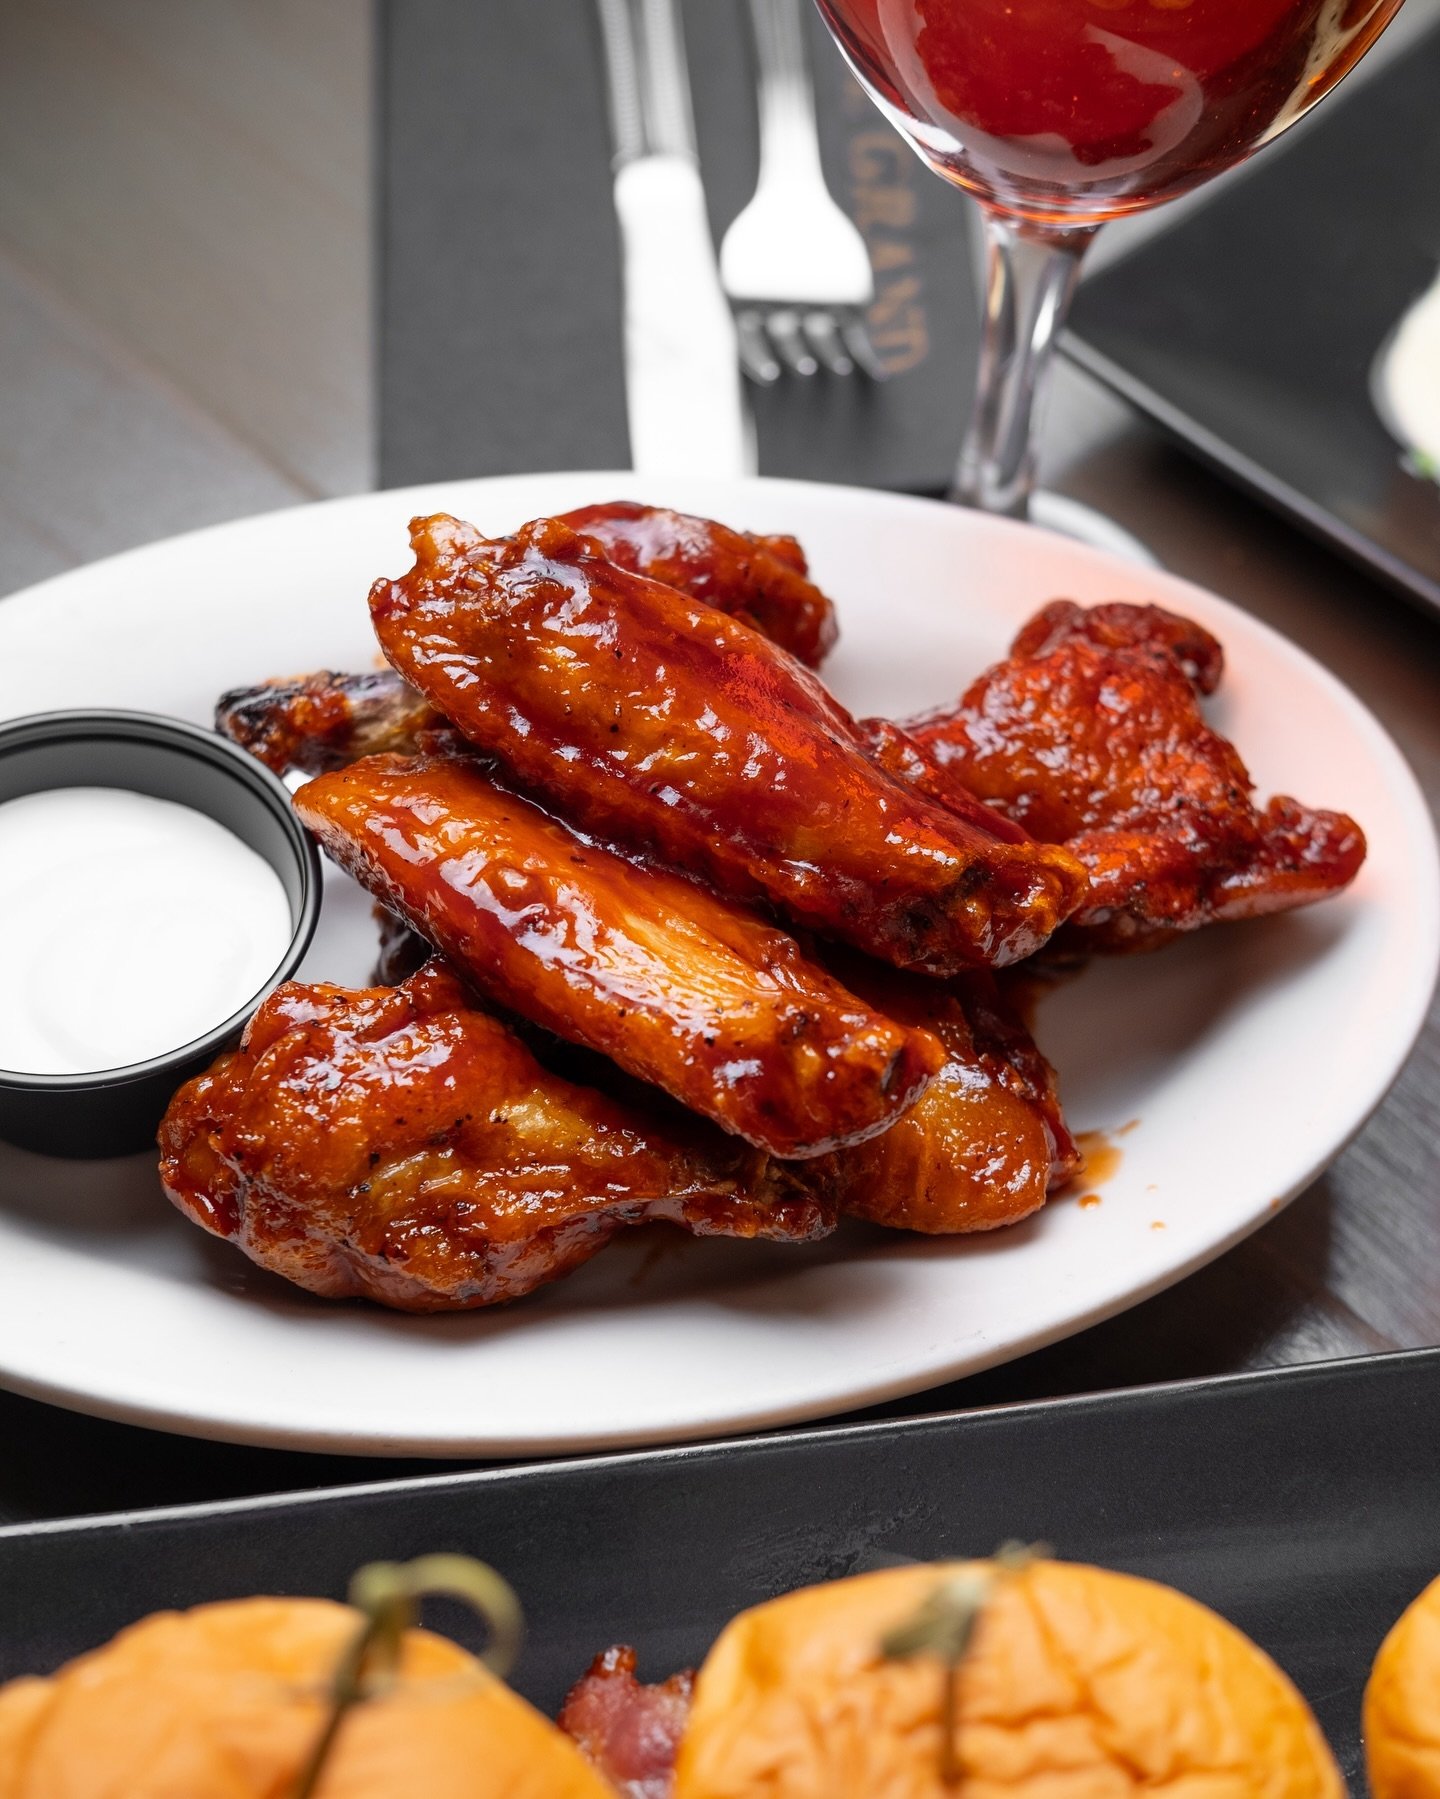 Satisfy your cravings with our mouthwatering BBQ chicken wings 🍗🍗🍗

🍽️ Tap the link in our bio for reservation &amp; more!

📍The Grand
37-01 30th Avenue
📞 (718) 806-1504